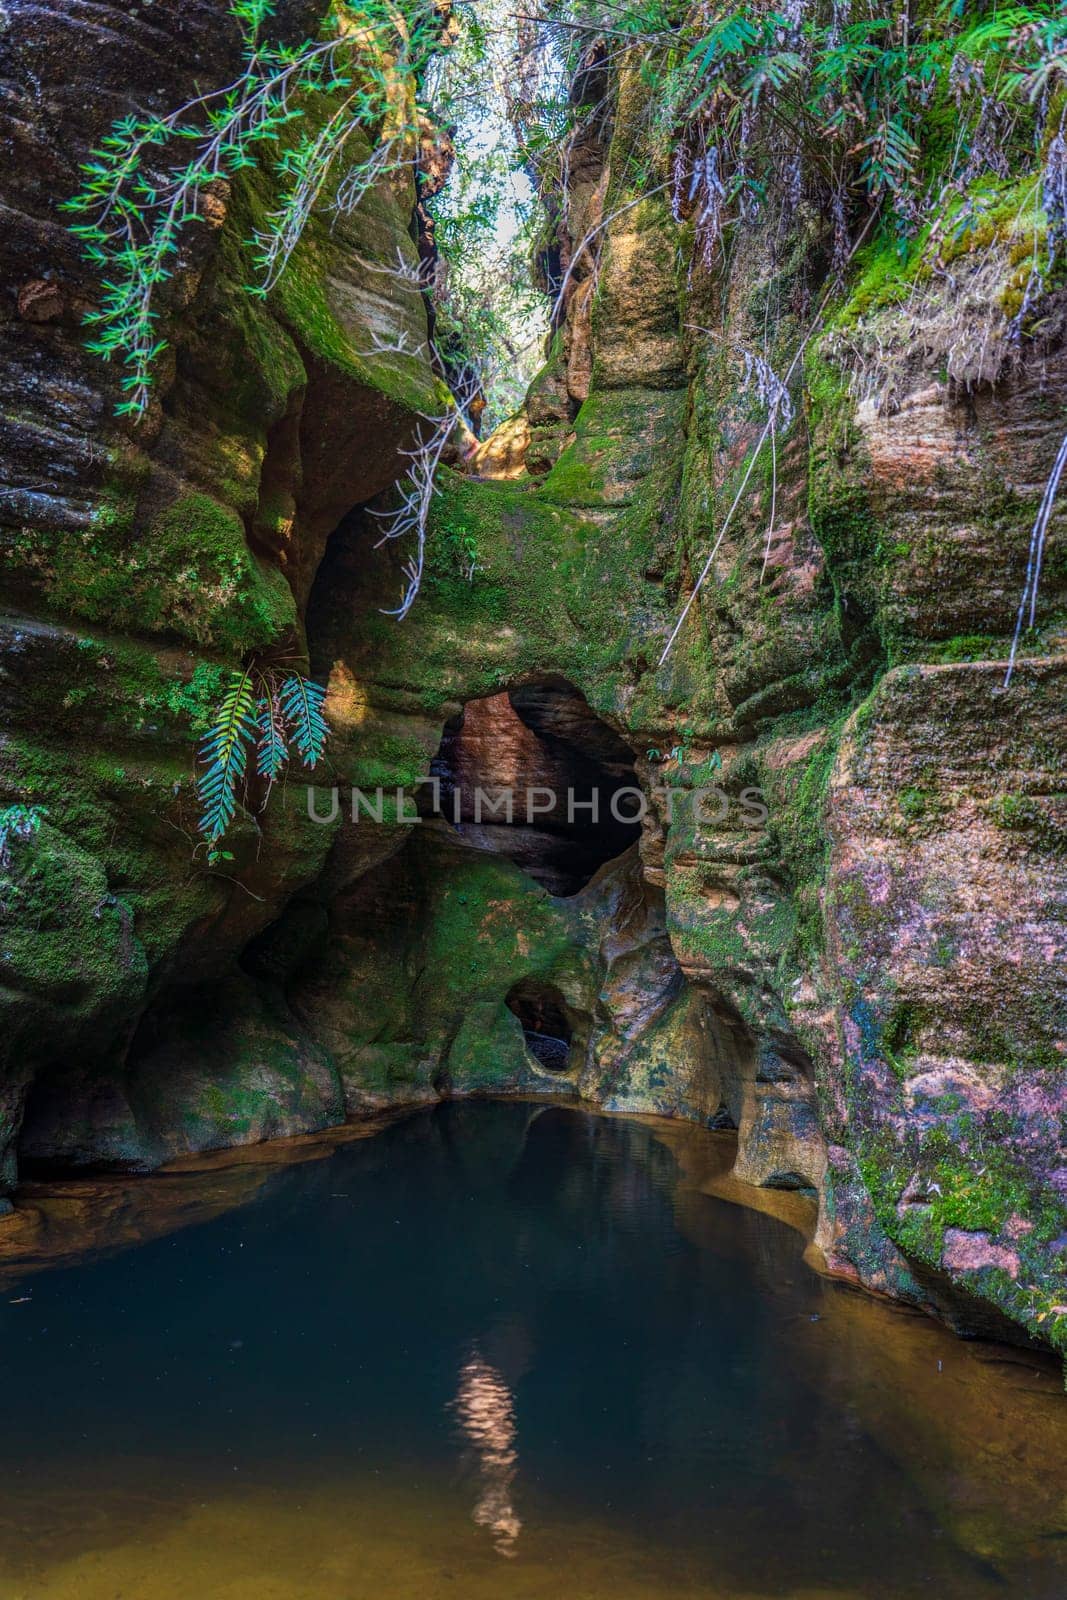 Secluded Natural Pool in a Forested Canyon Oasis by FerradalFCG